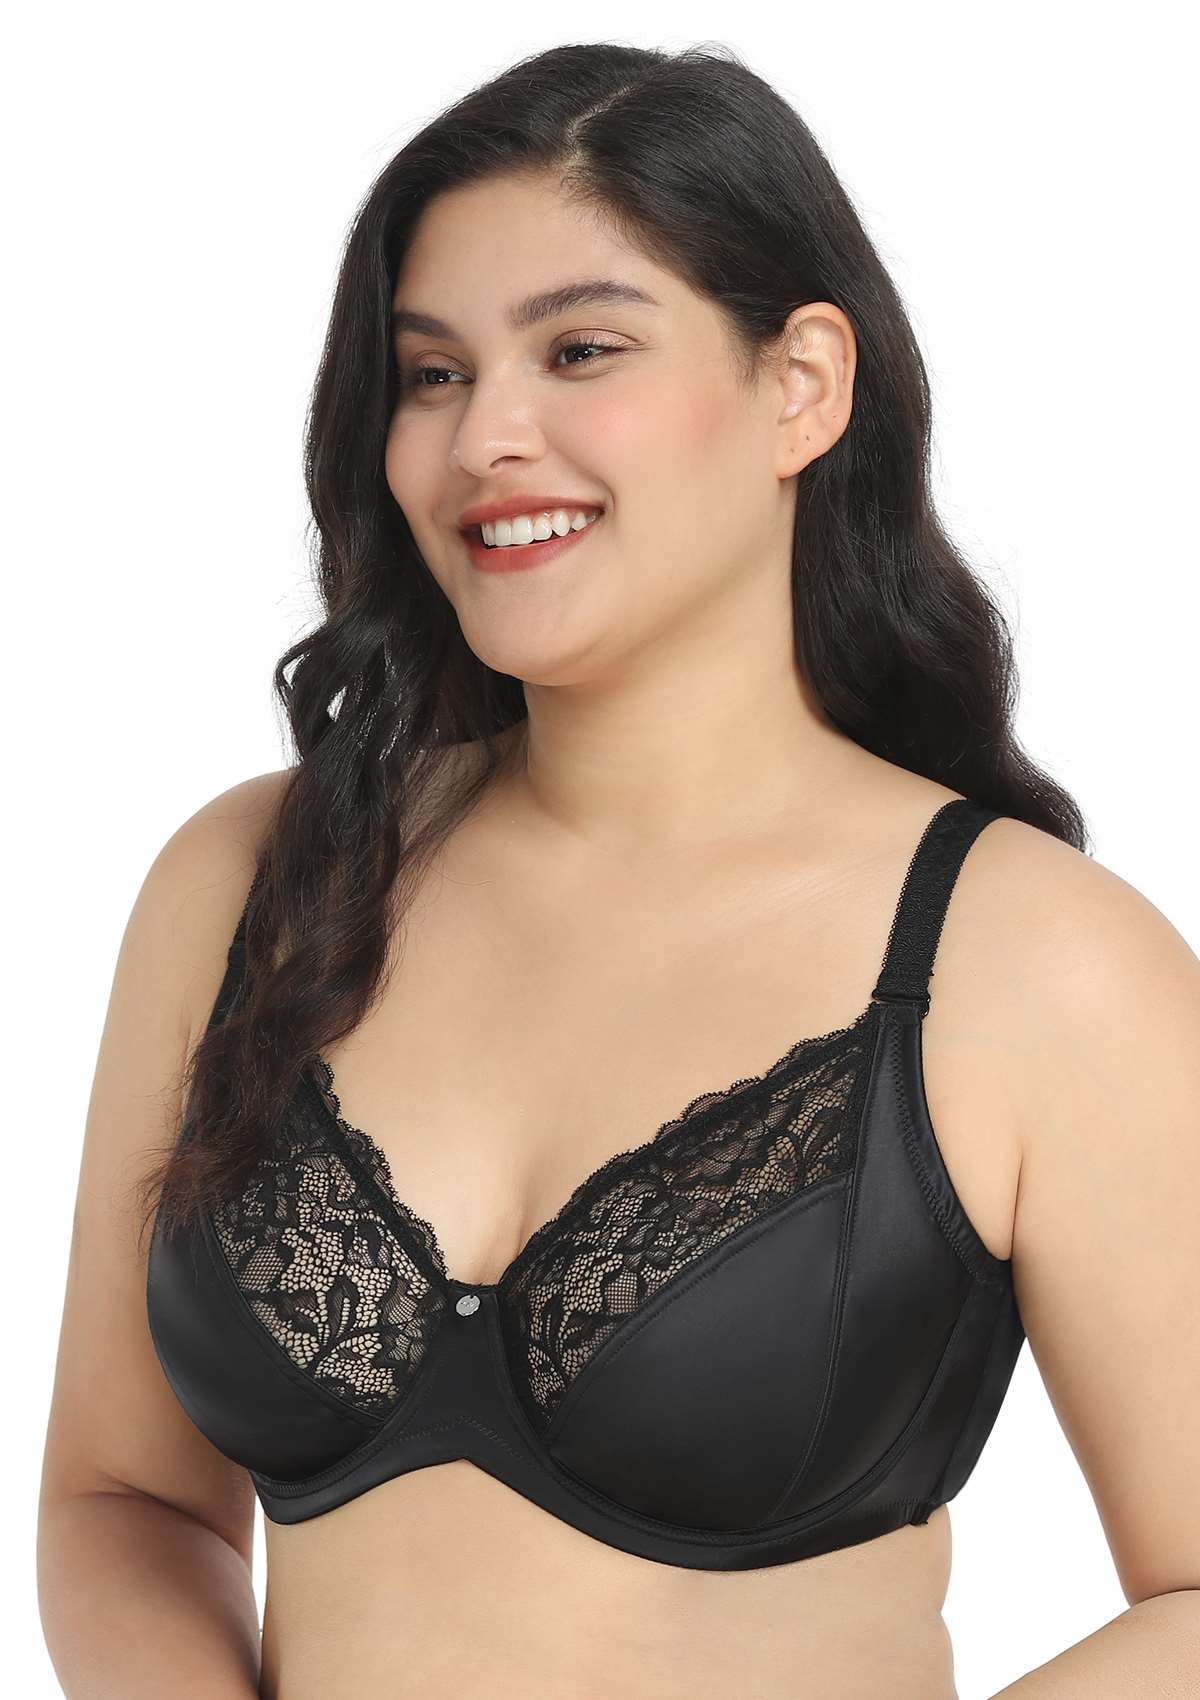 HSIA Foxy Satin Silky Full Coverage Underwire Bra With Floral Lace Trim - Black / 40 / H